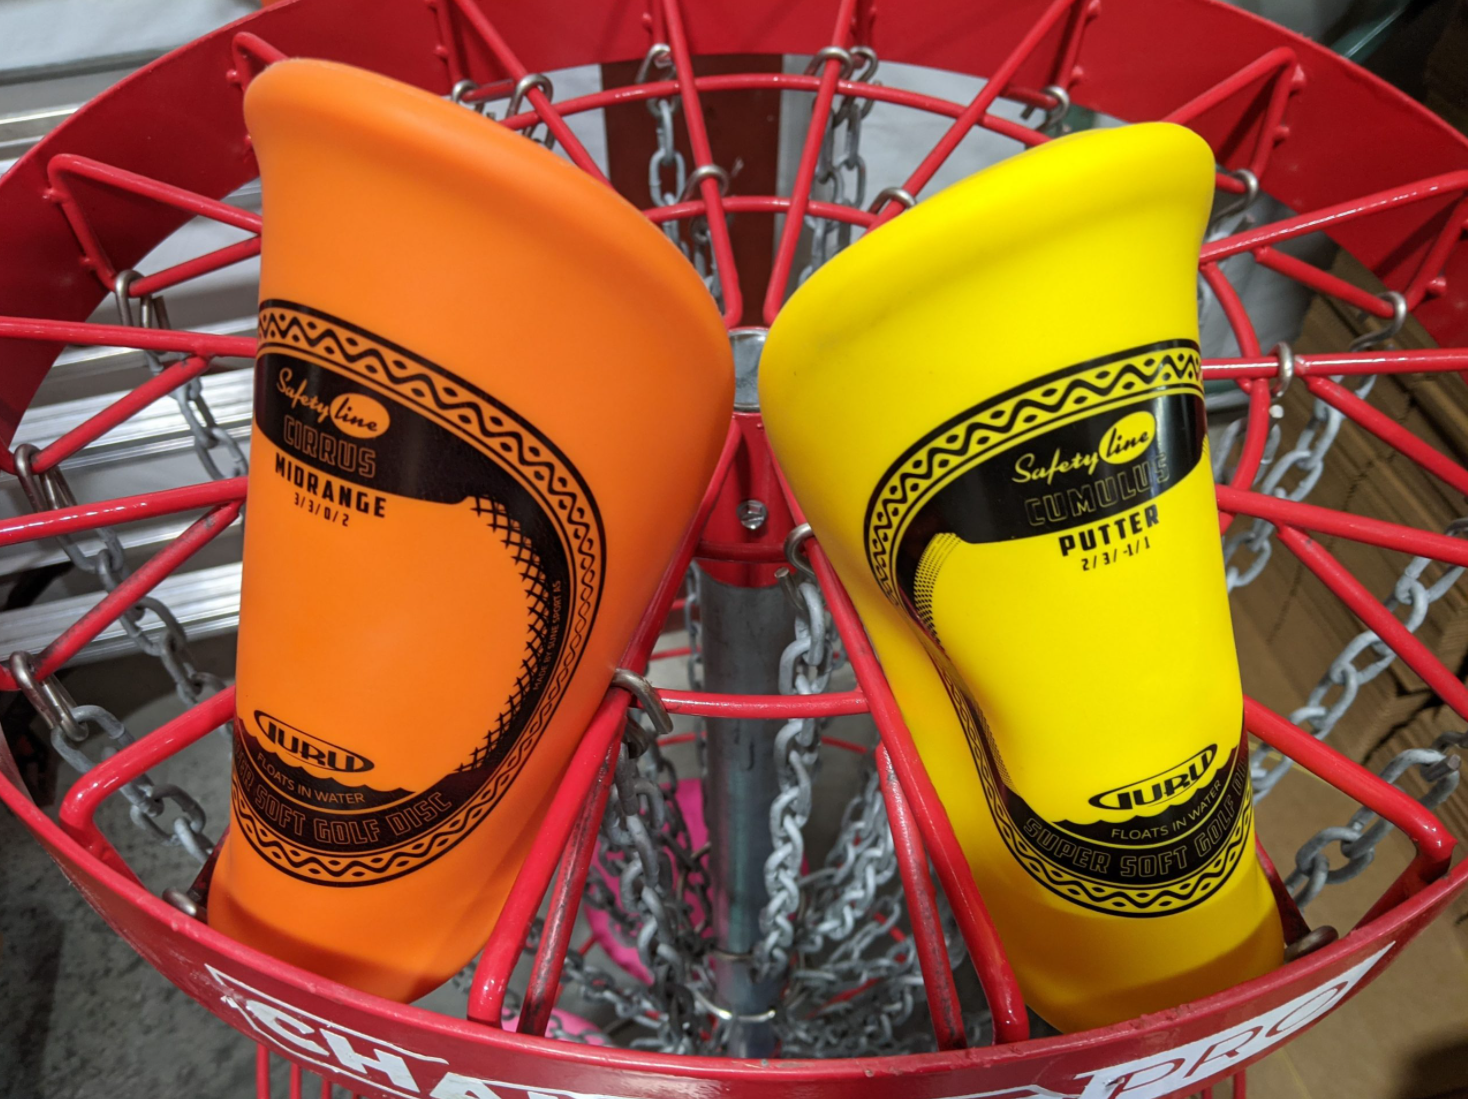 insanely soft sune safety line disc golf discs